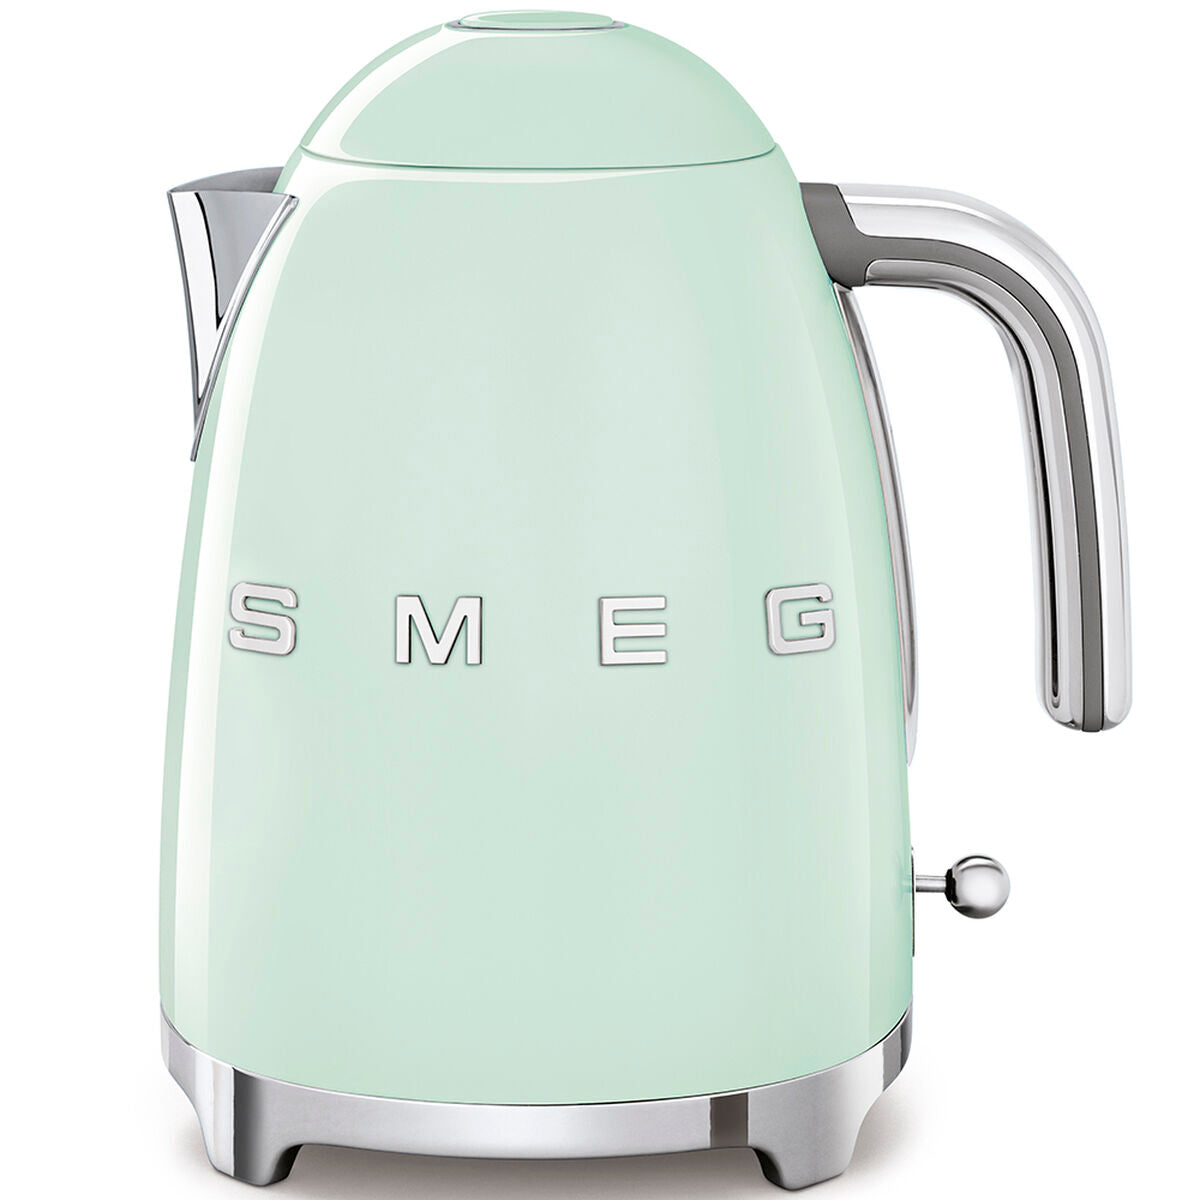 Kettle Smeg Green 2400 W 1,7 L Stainless steel (Refurbished A)